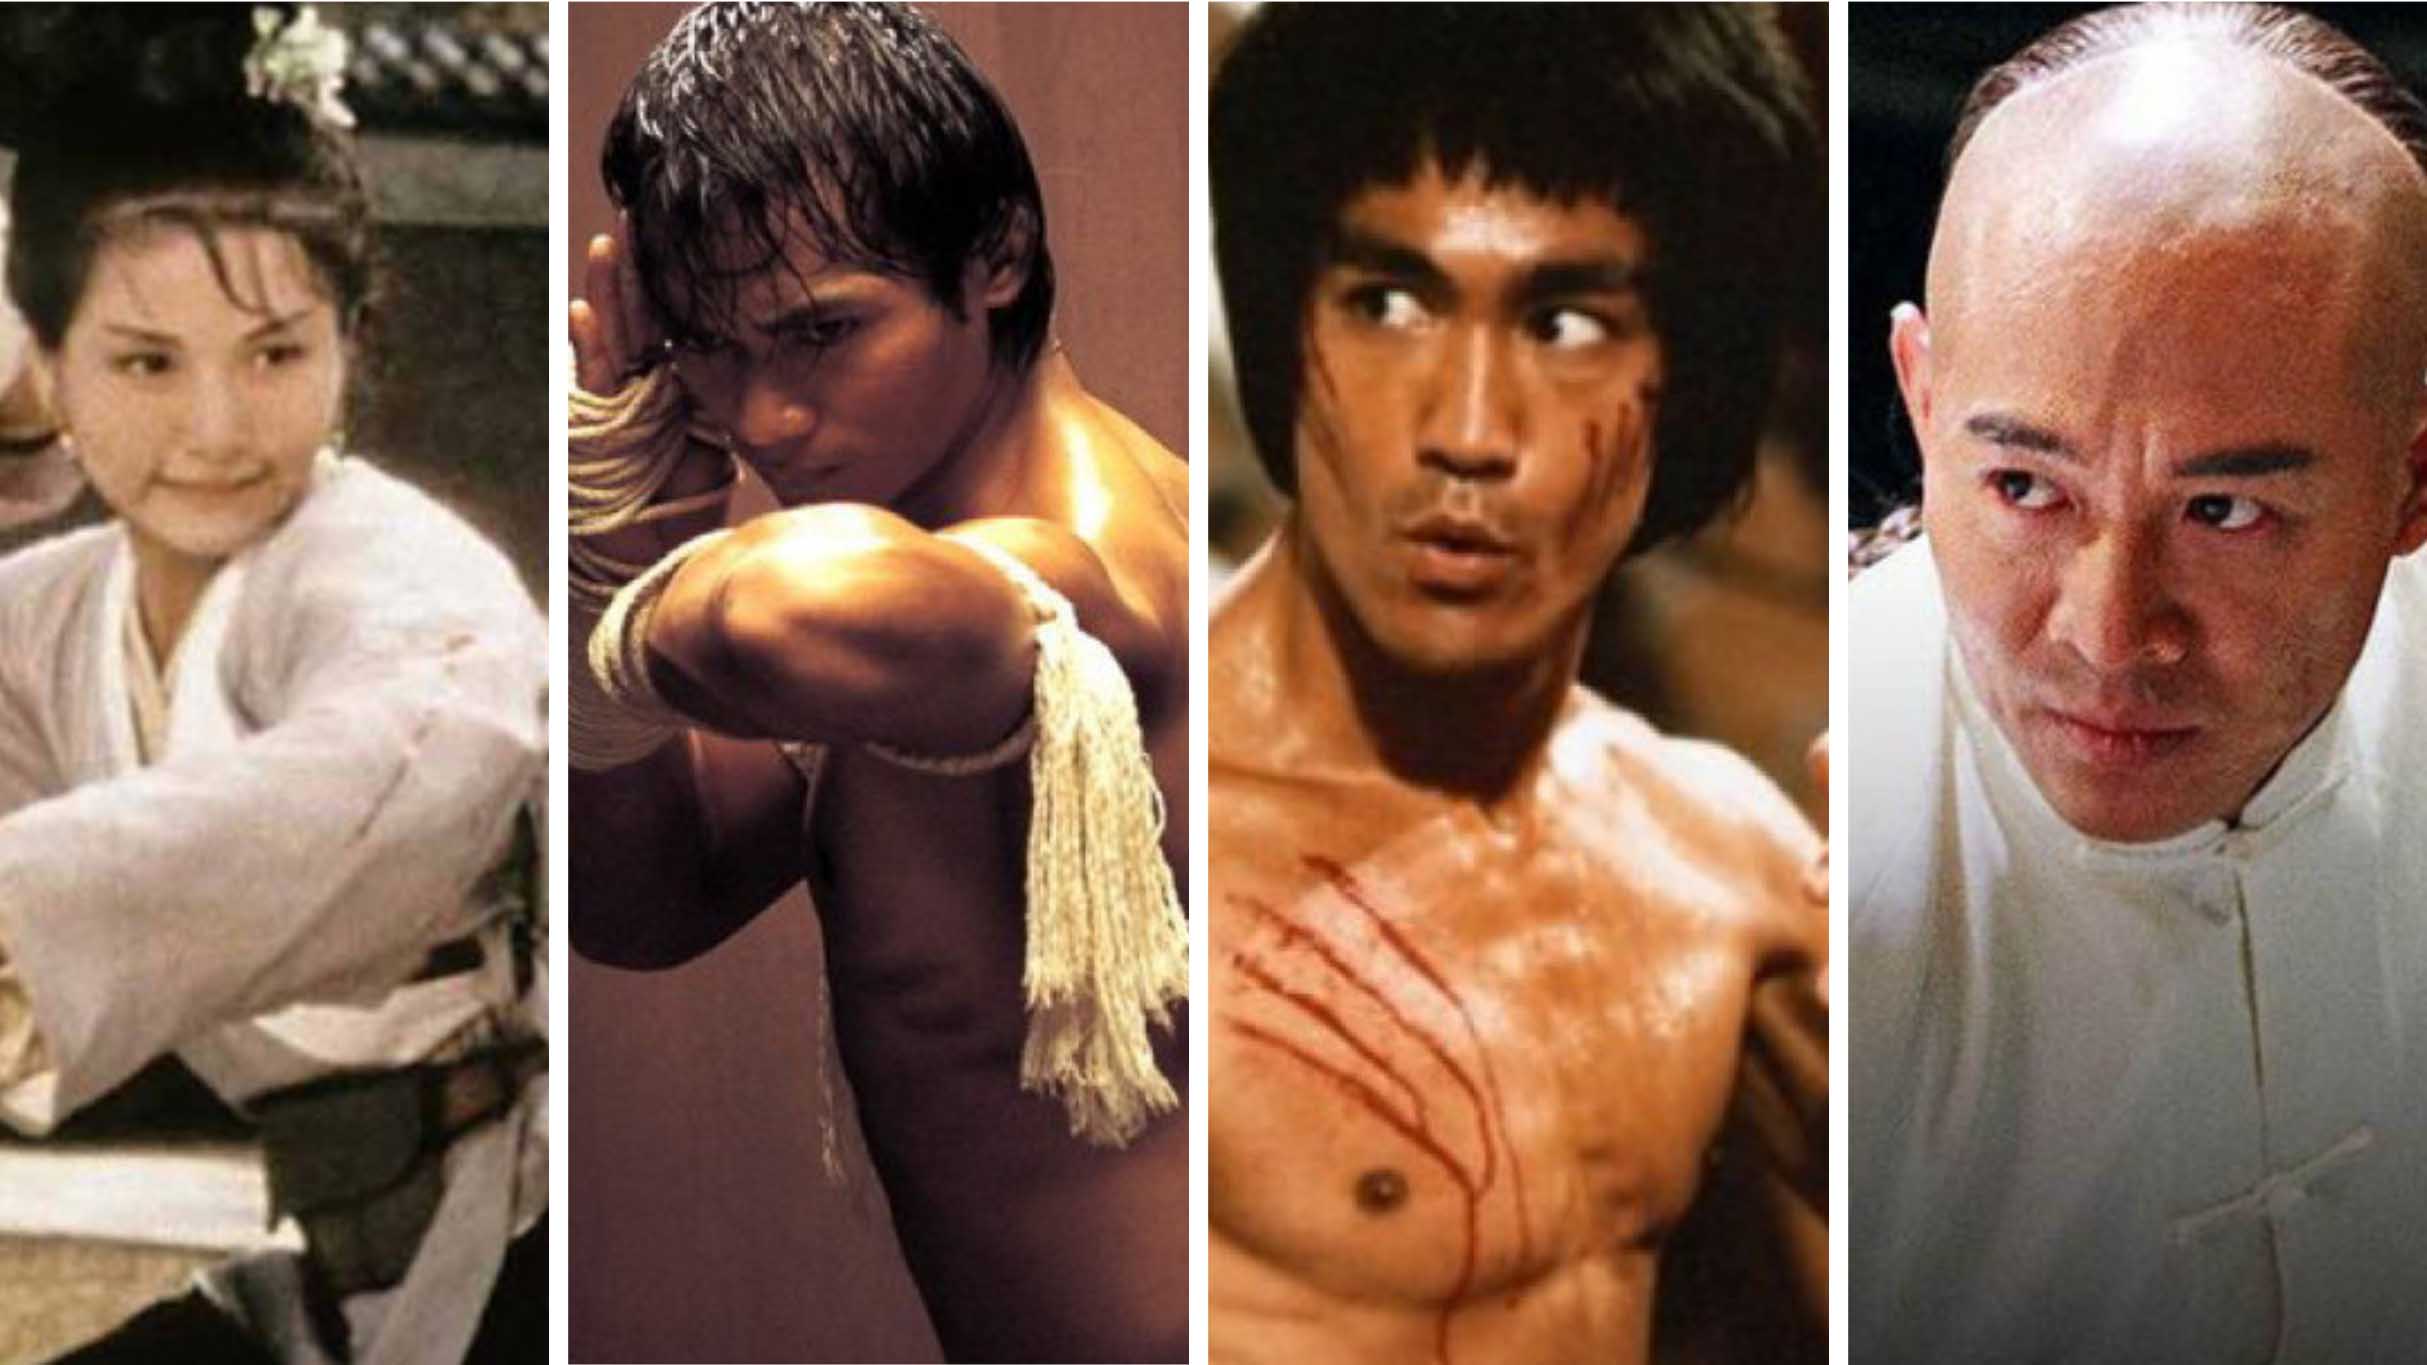 Every Fighting Style Practiced By Bruce Lee (& Where He Learned Them)